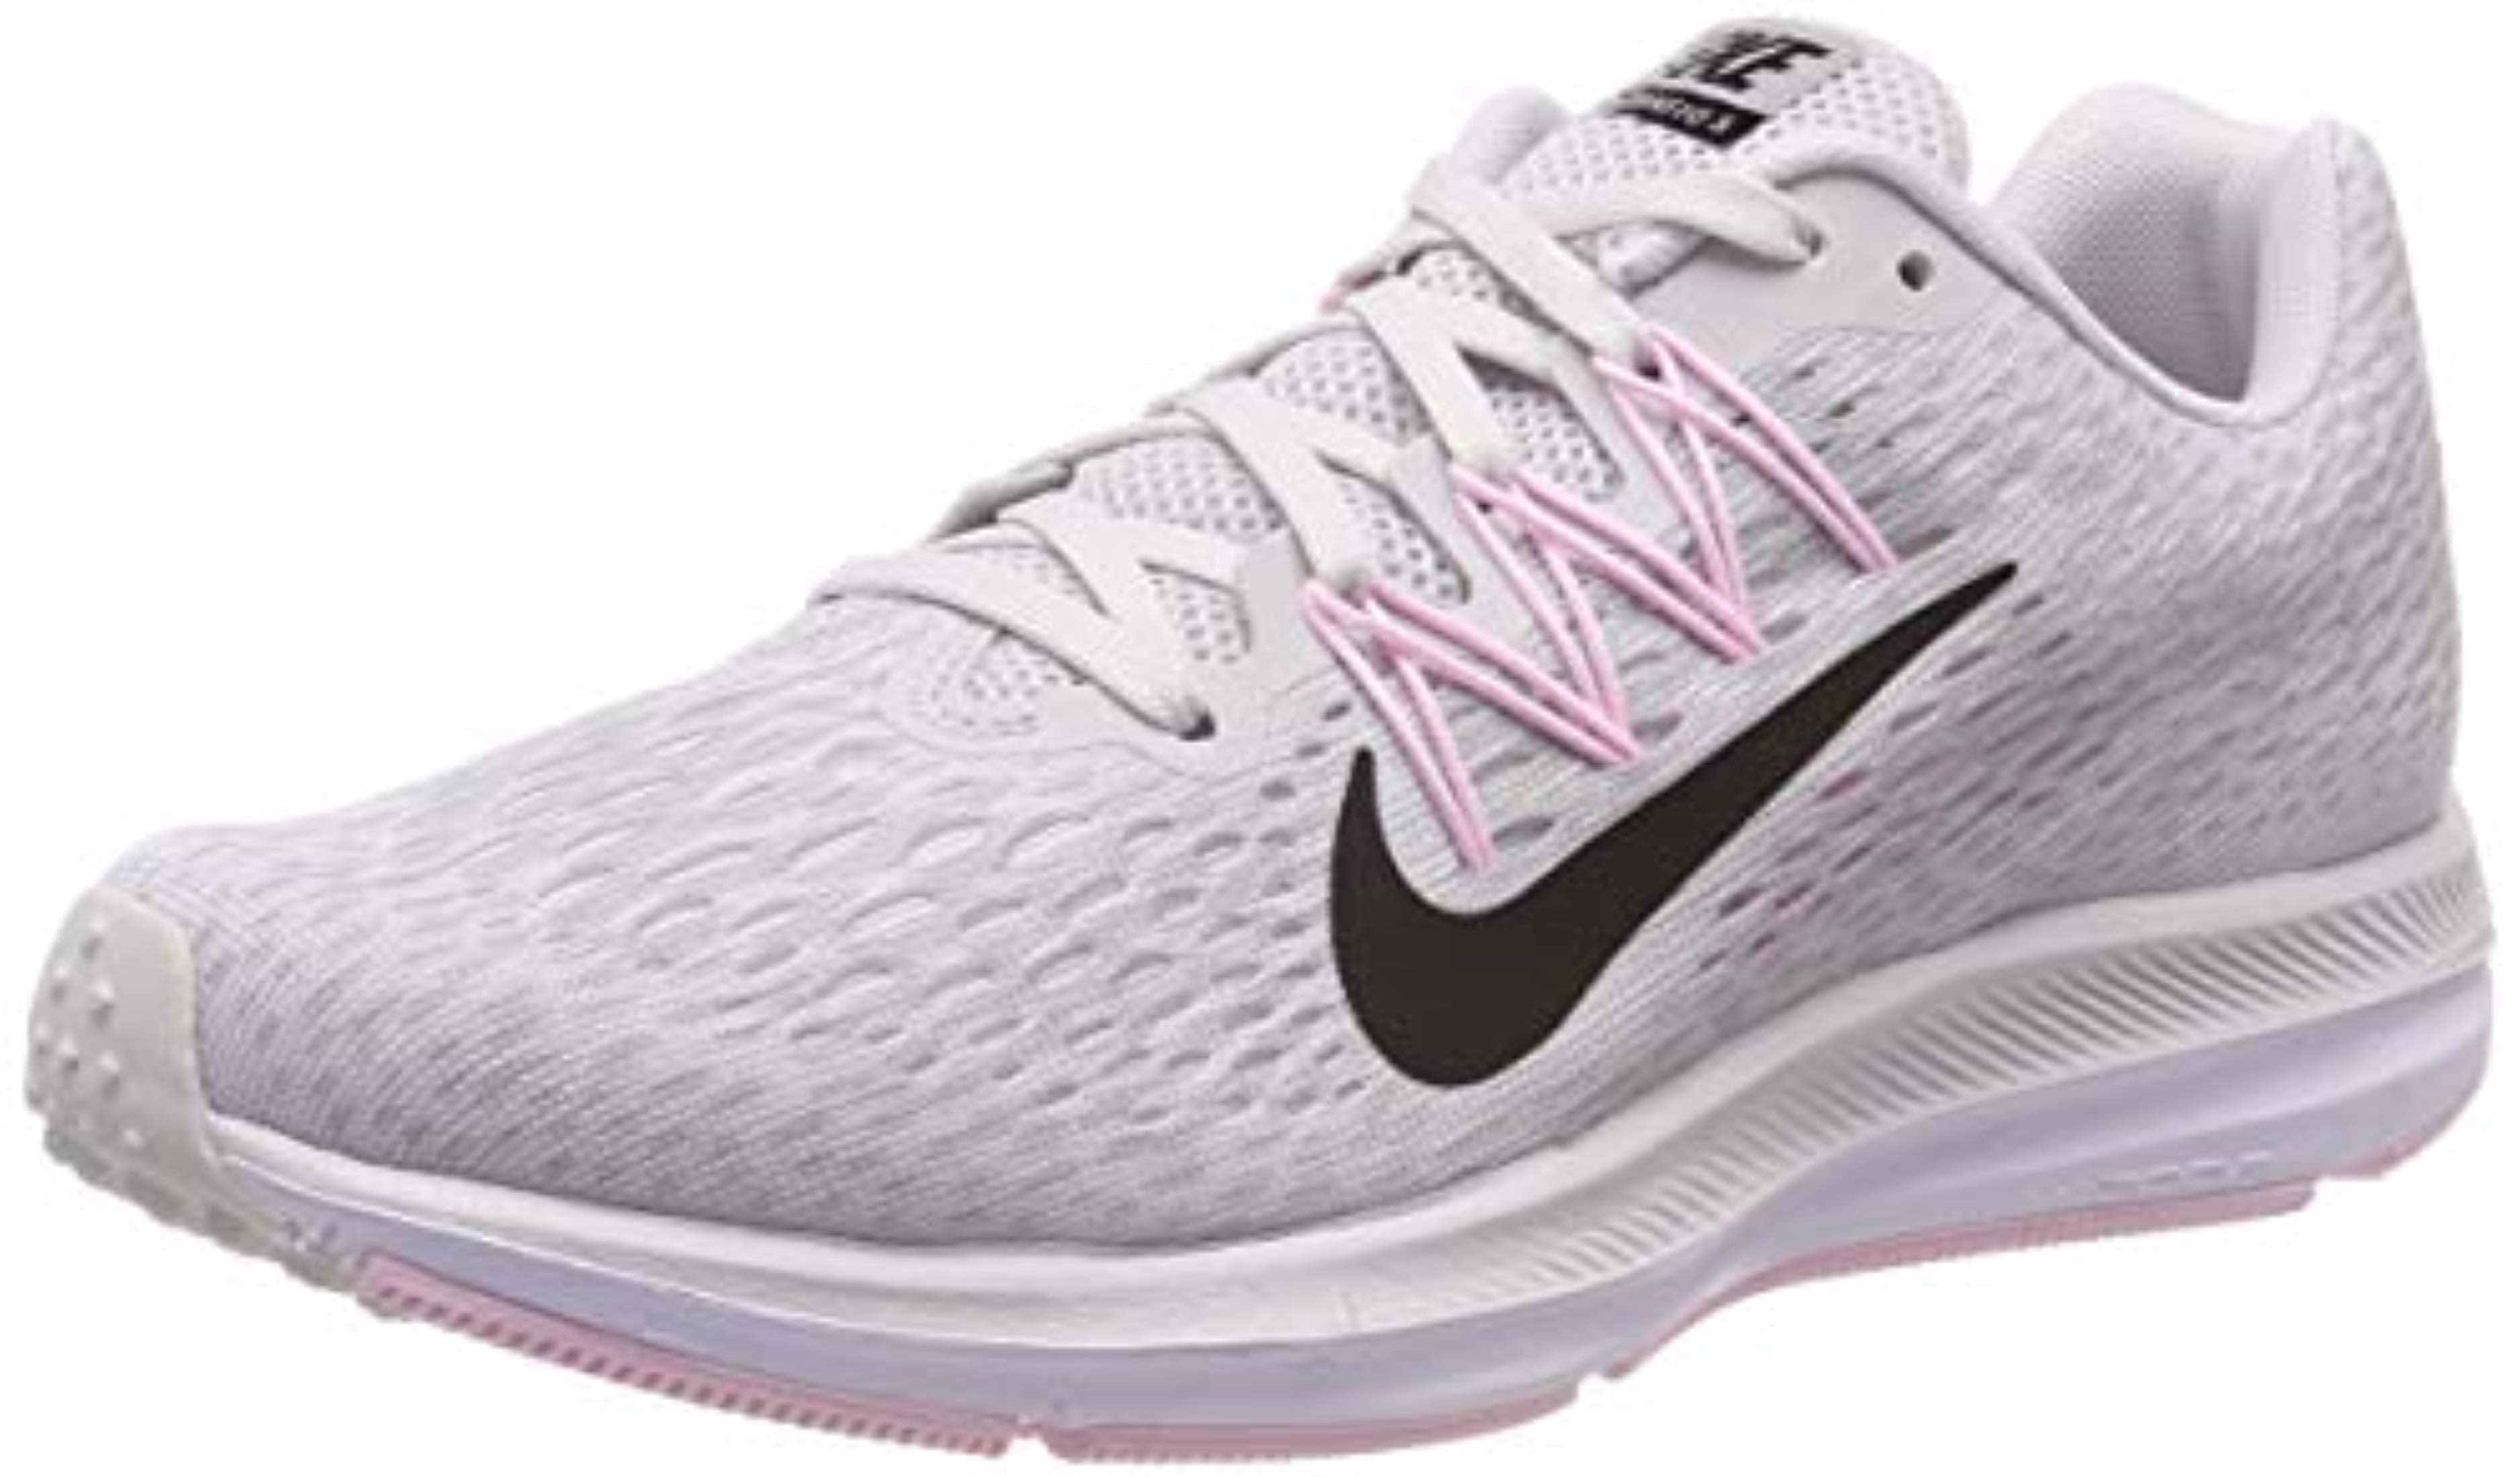 Air Zoom Winflo 5 Running Shoes 